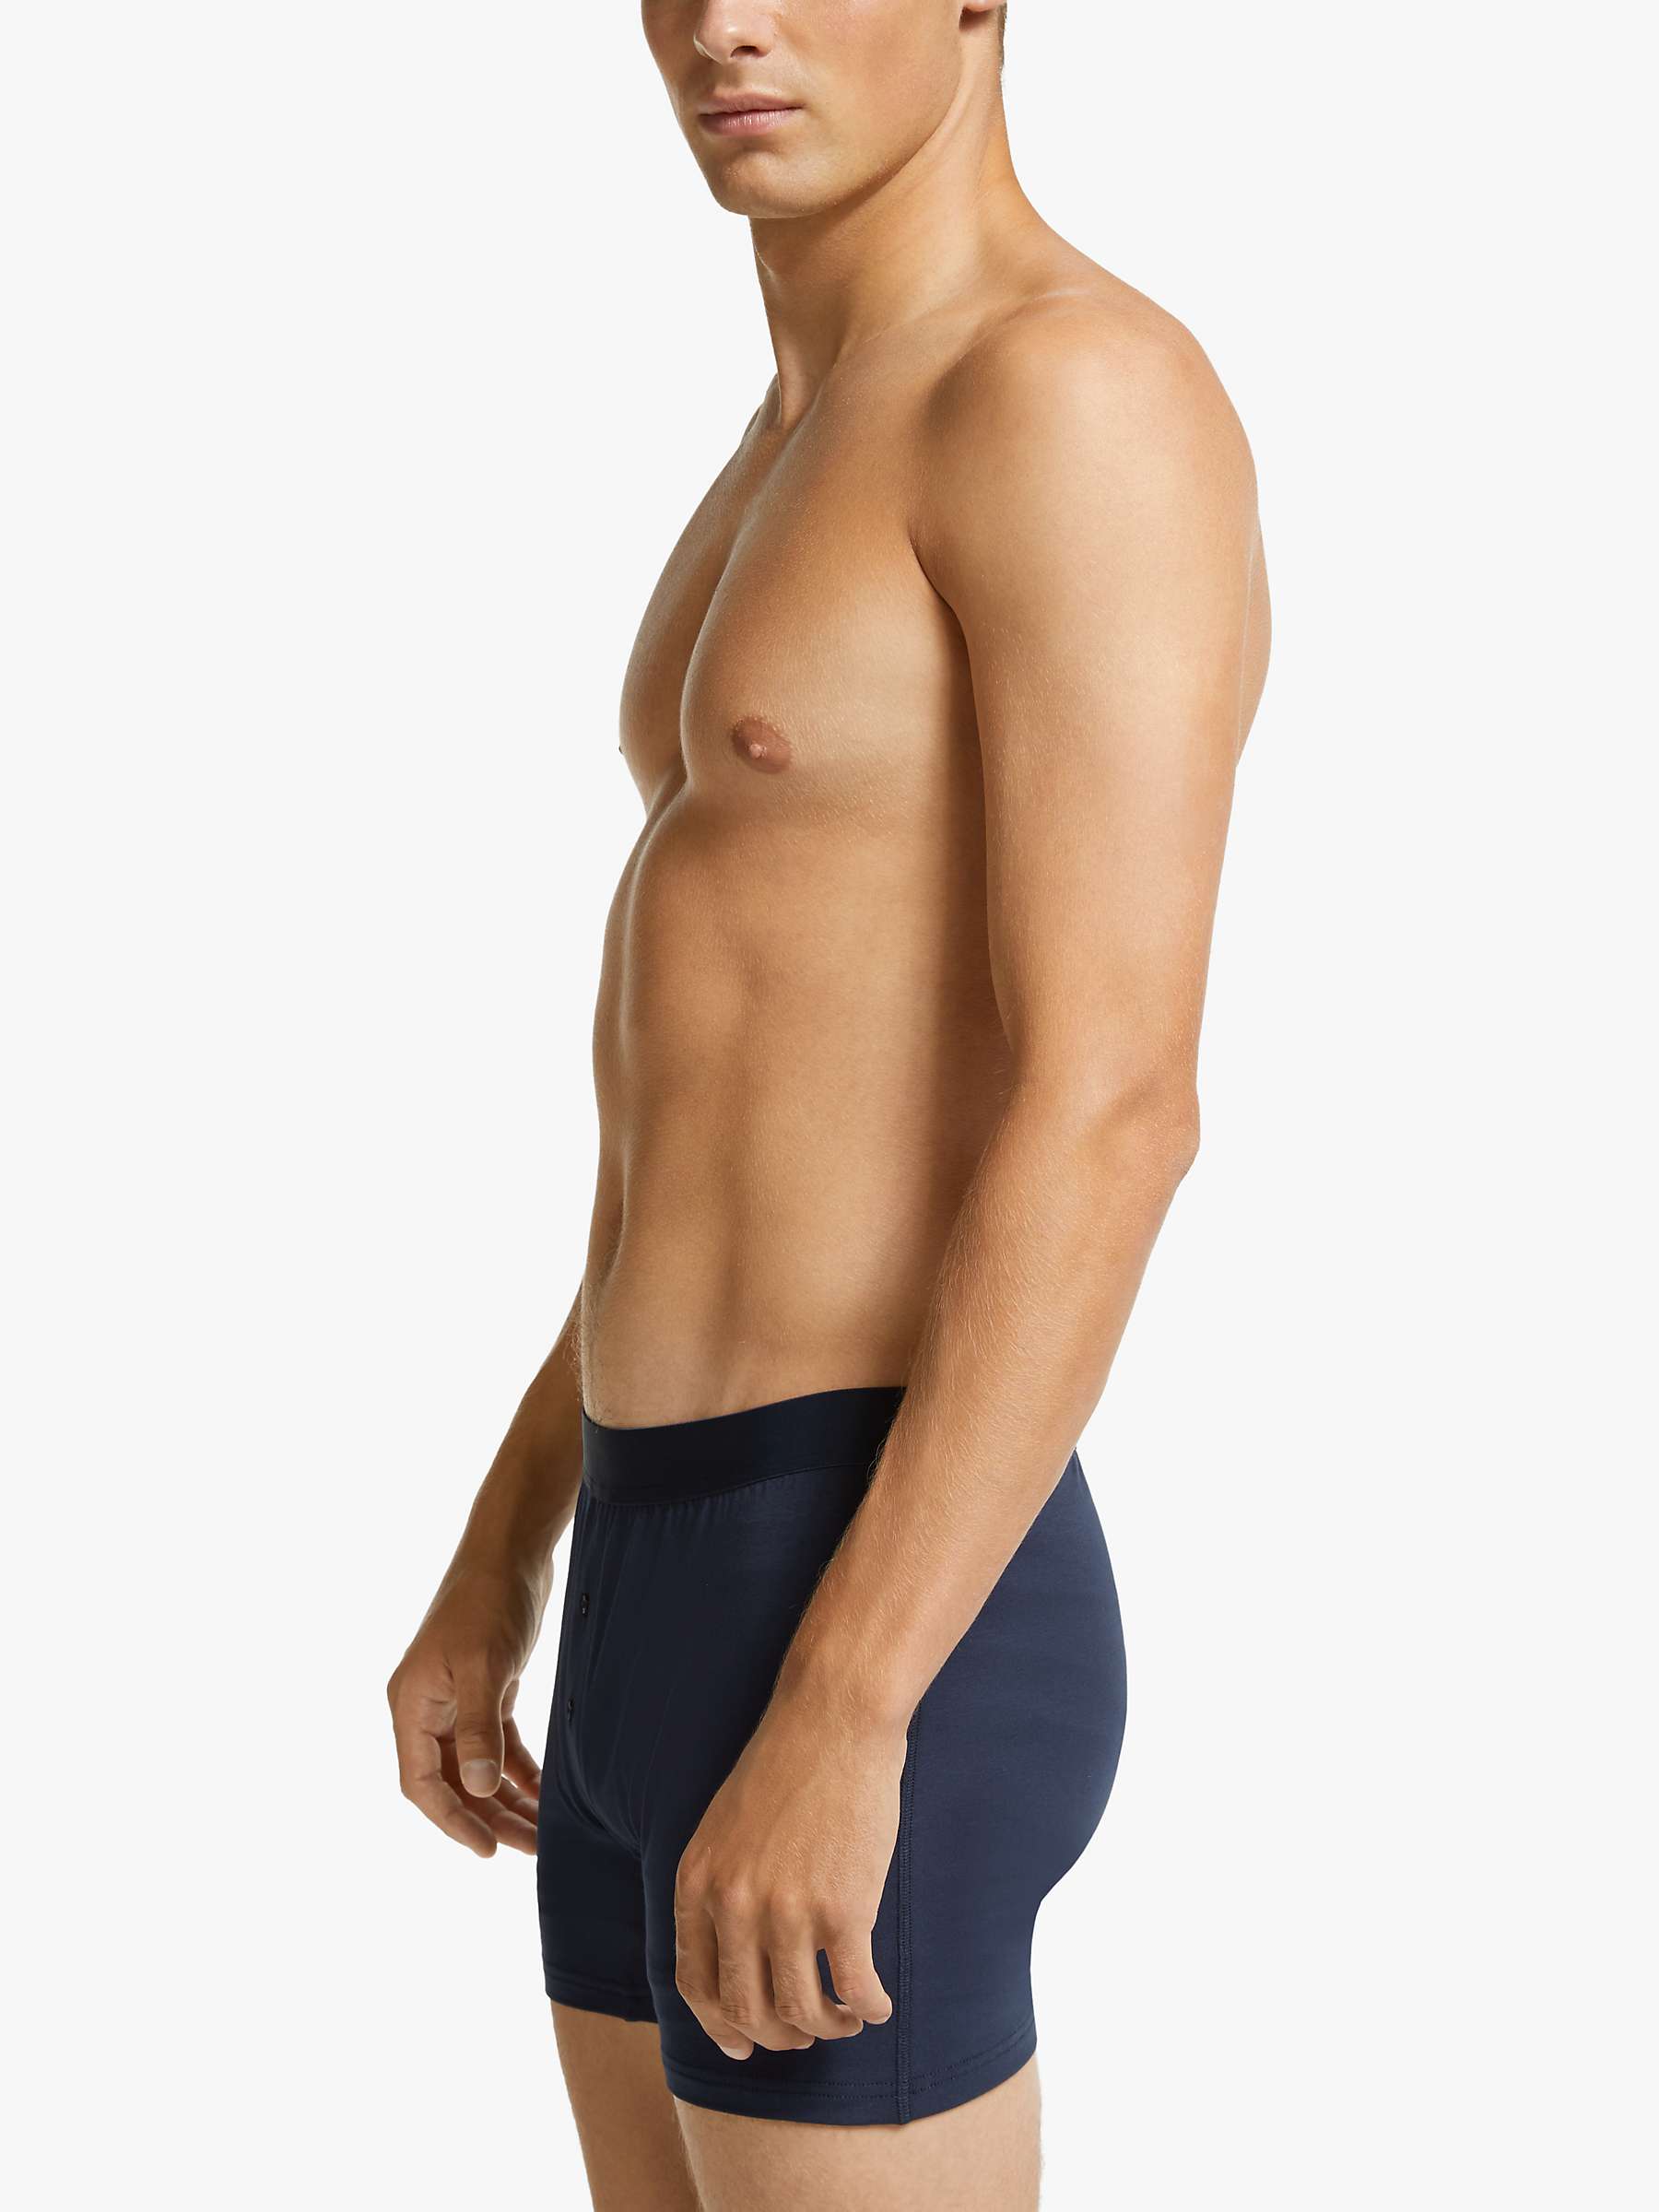 Buy John Lewis Organic Cotton Button Fly Trunks, Pack of 3 Online at johnlewis.com